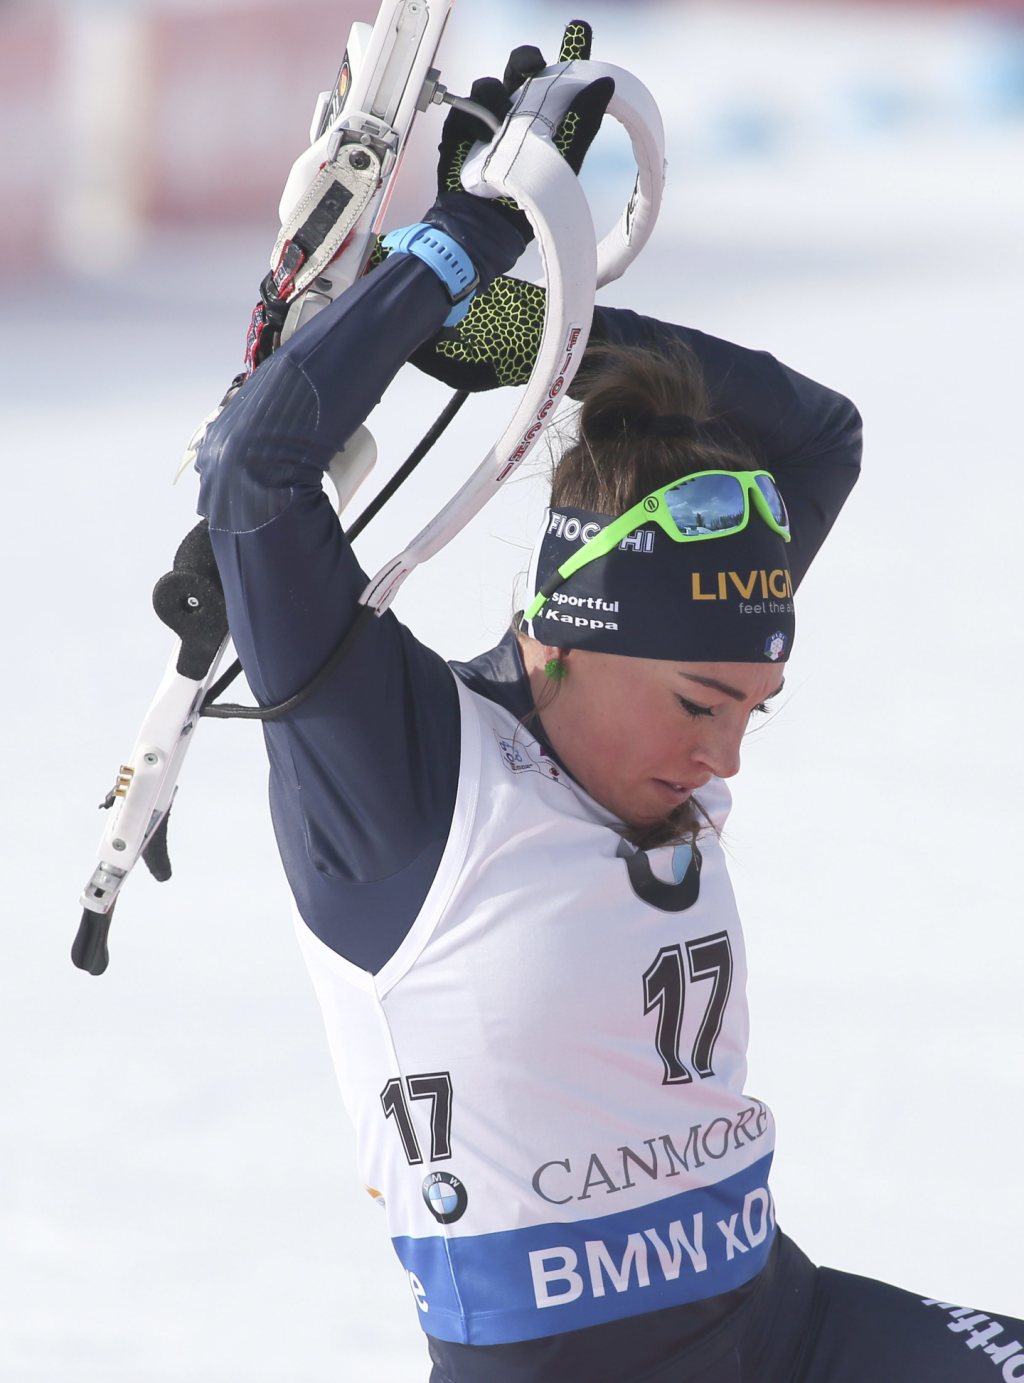 Dorothea Wierer of Italy competes at the biathlon World Cup event фото (photo)